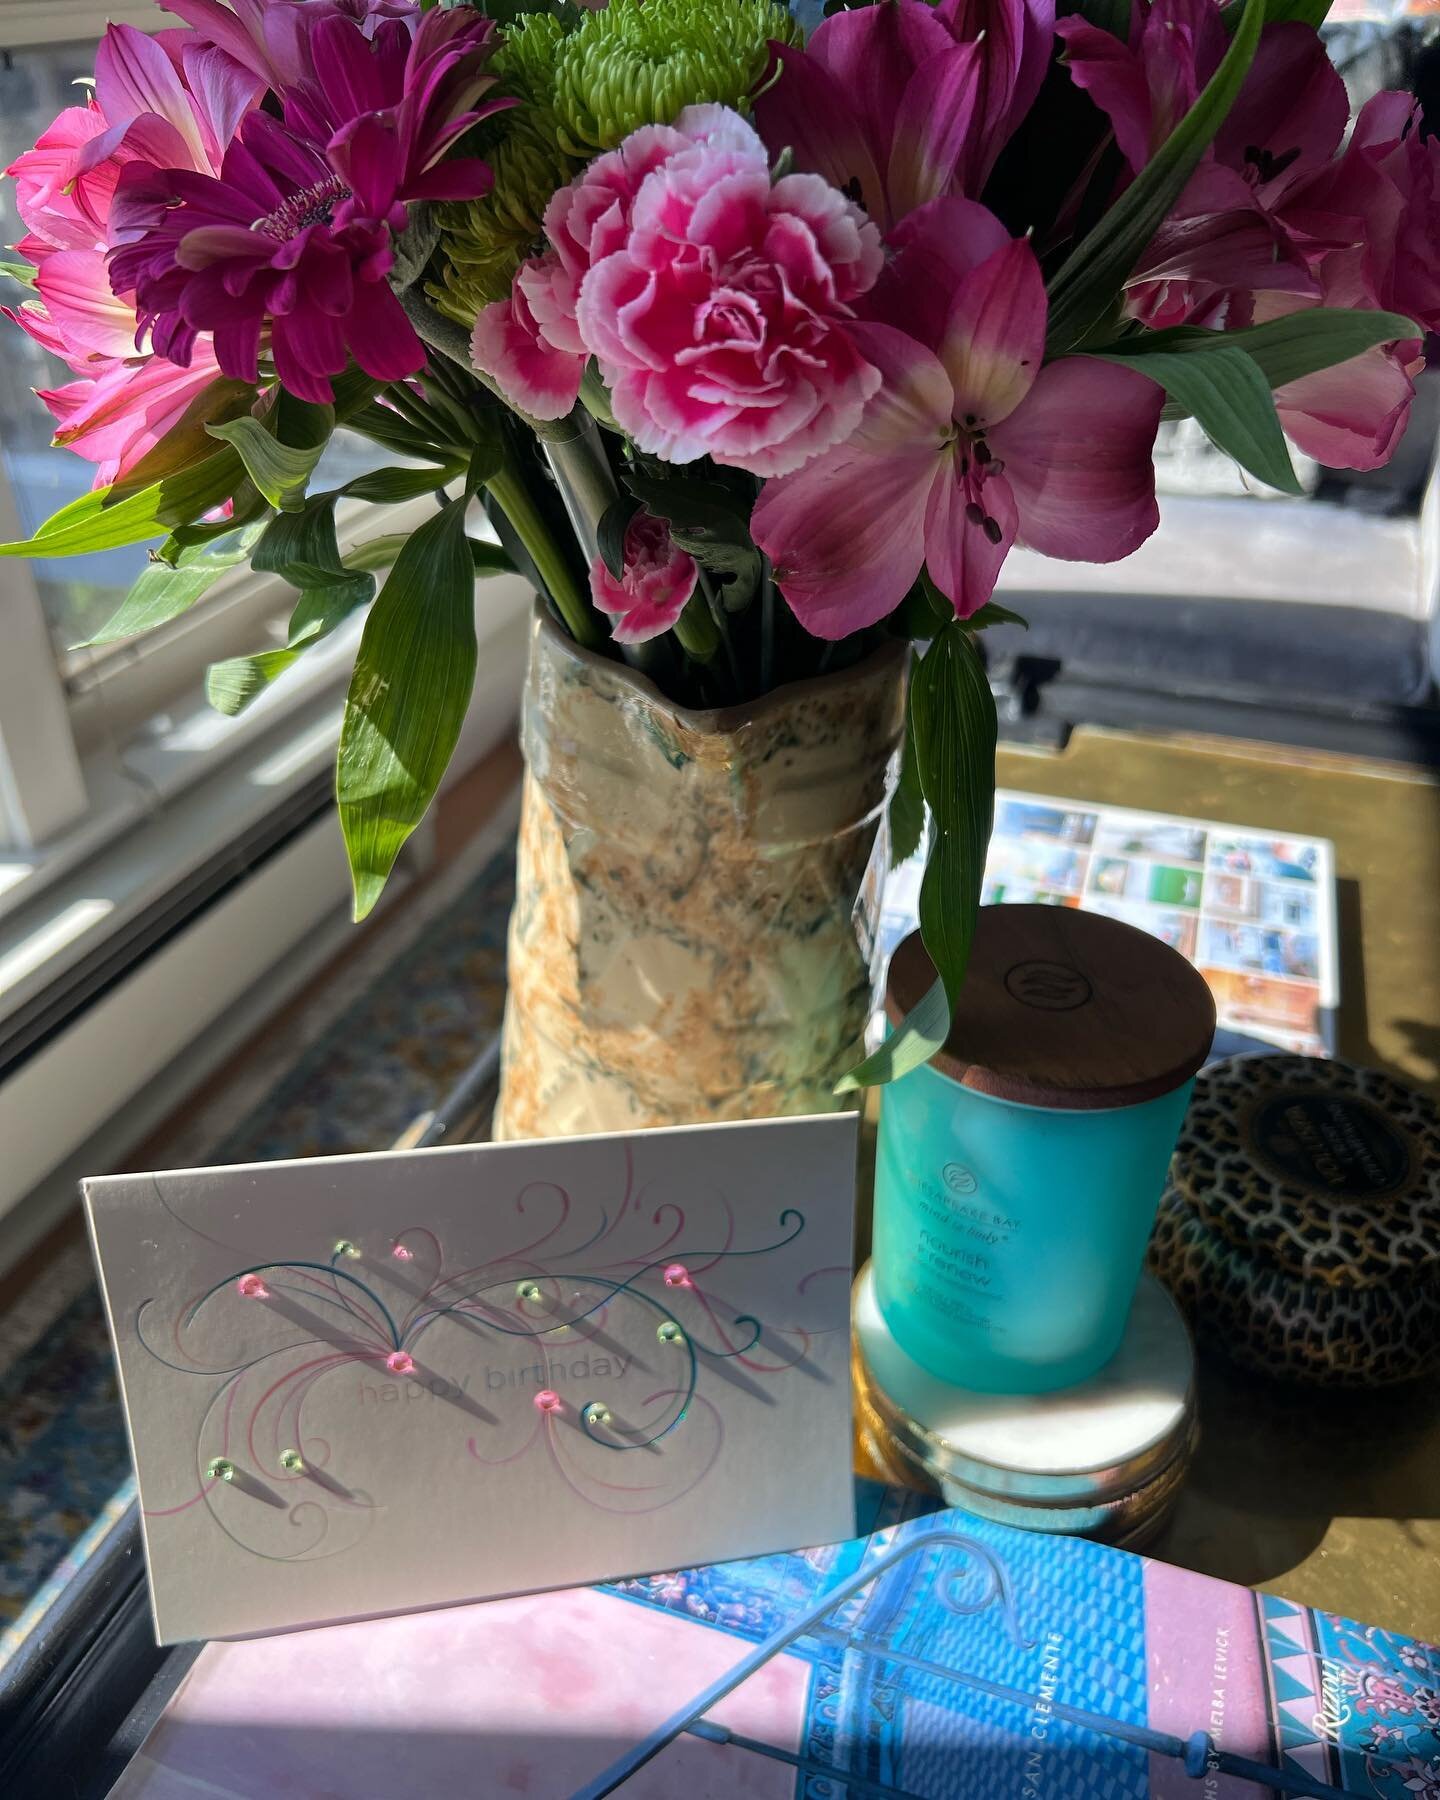 It&rsquo;s a rather low key 58th birthday 🥳 for me today. Got together with my friends last night for a delicious steak dinner. Which is where the lovely flowers, card and candle came from. Today I worked from home, fixed up my deck, it is thankfull